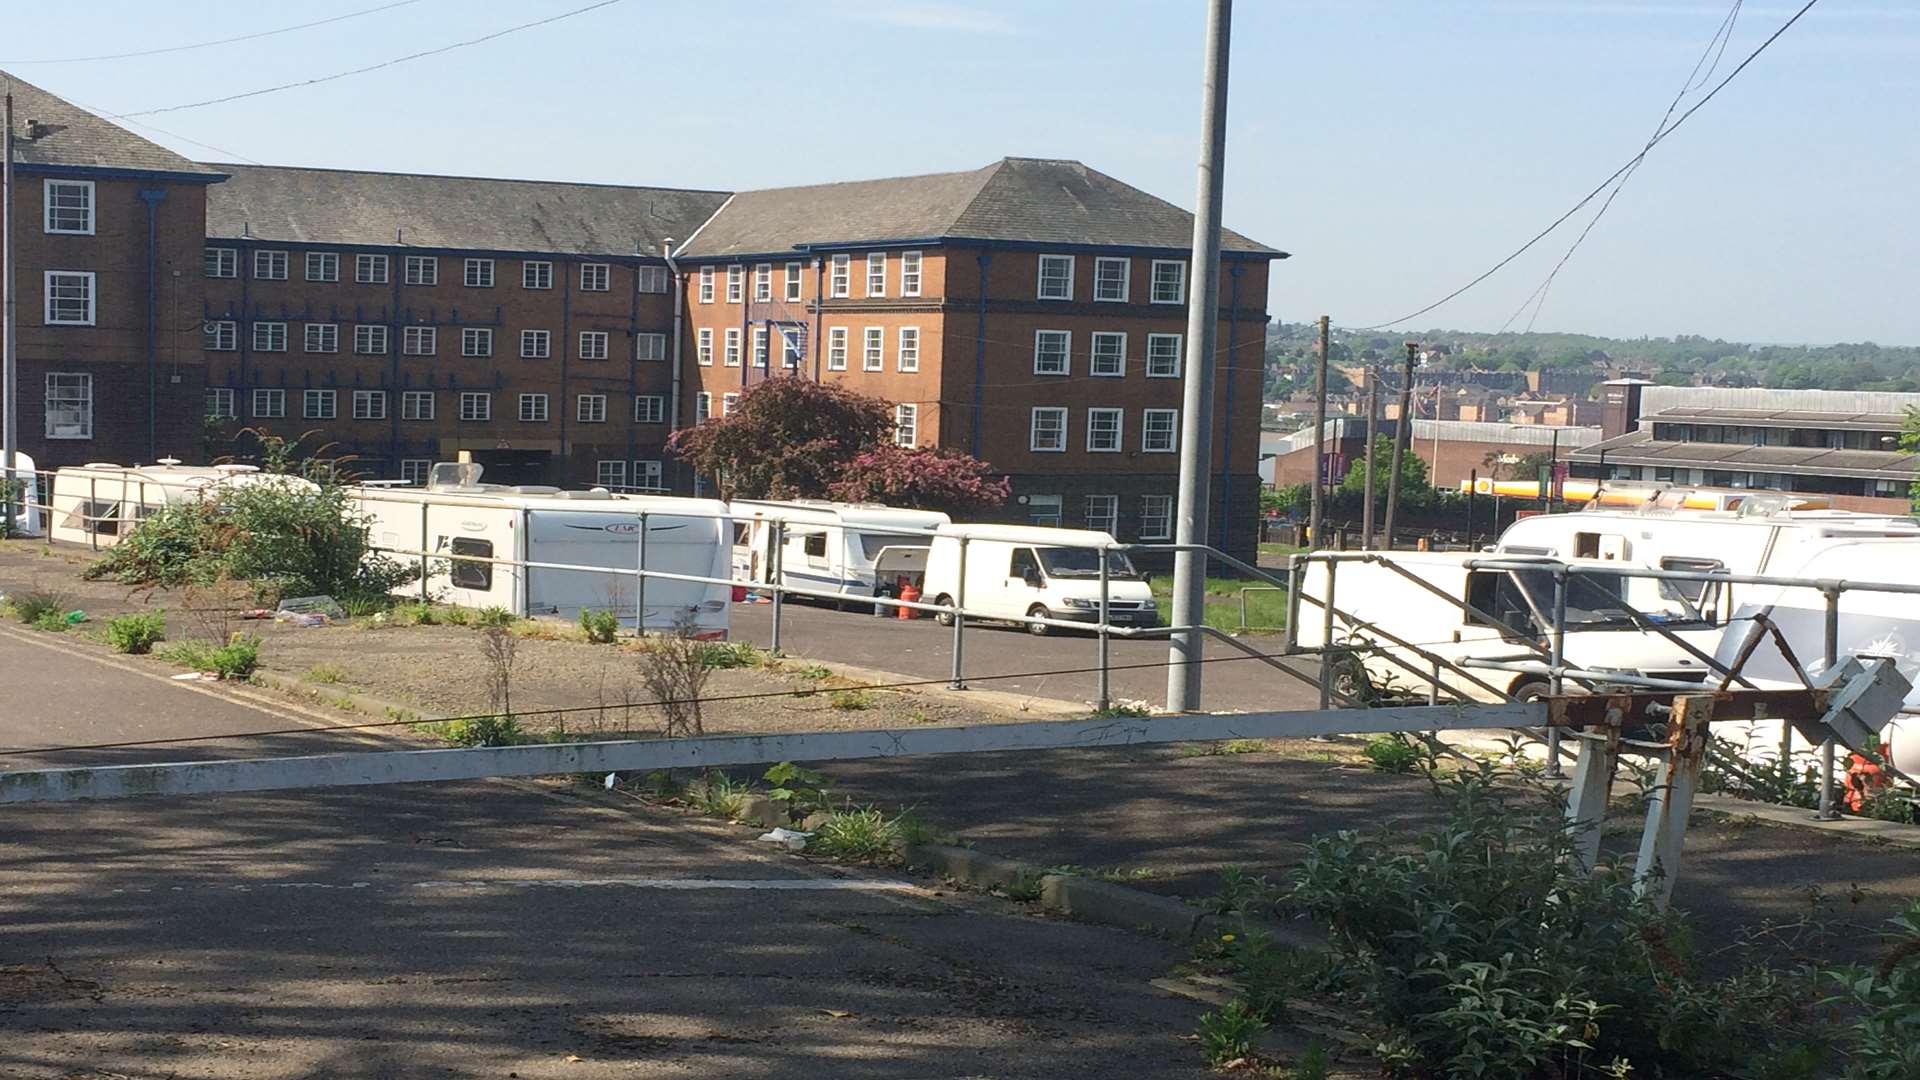 Gypsies have moved into Kitchener Barracks in Dock Road, Chatham